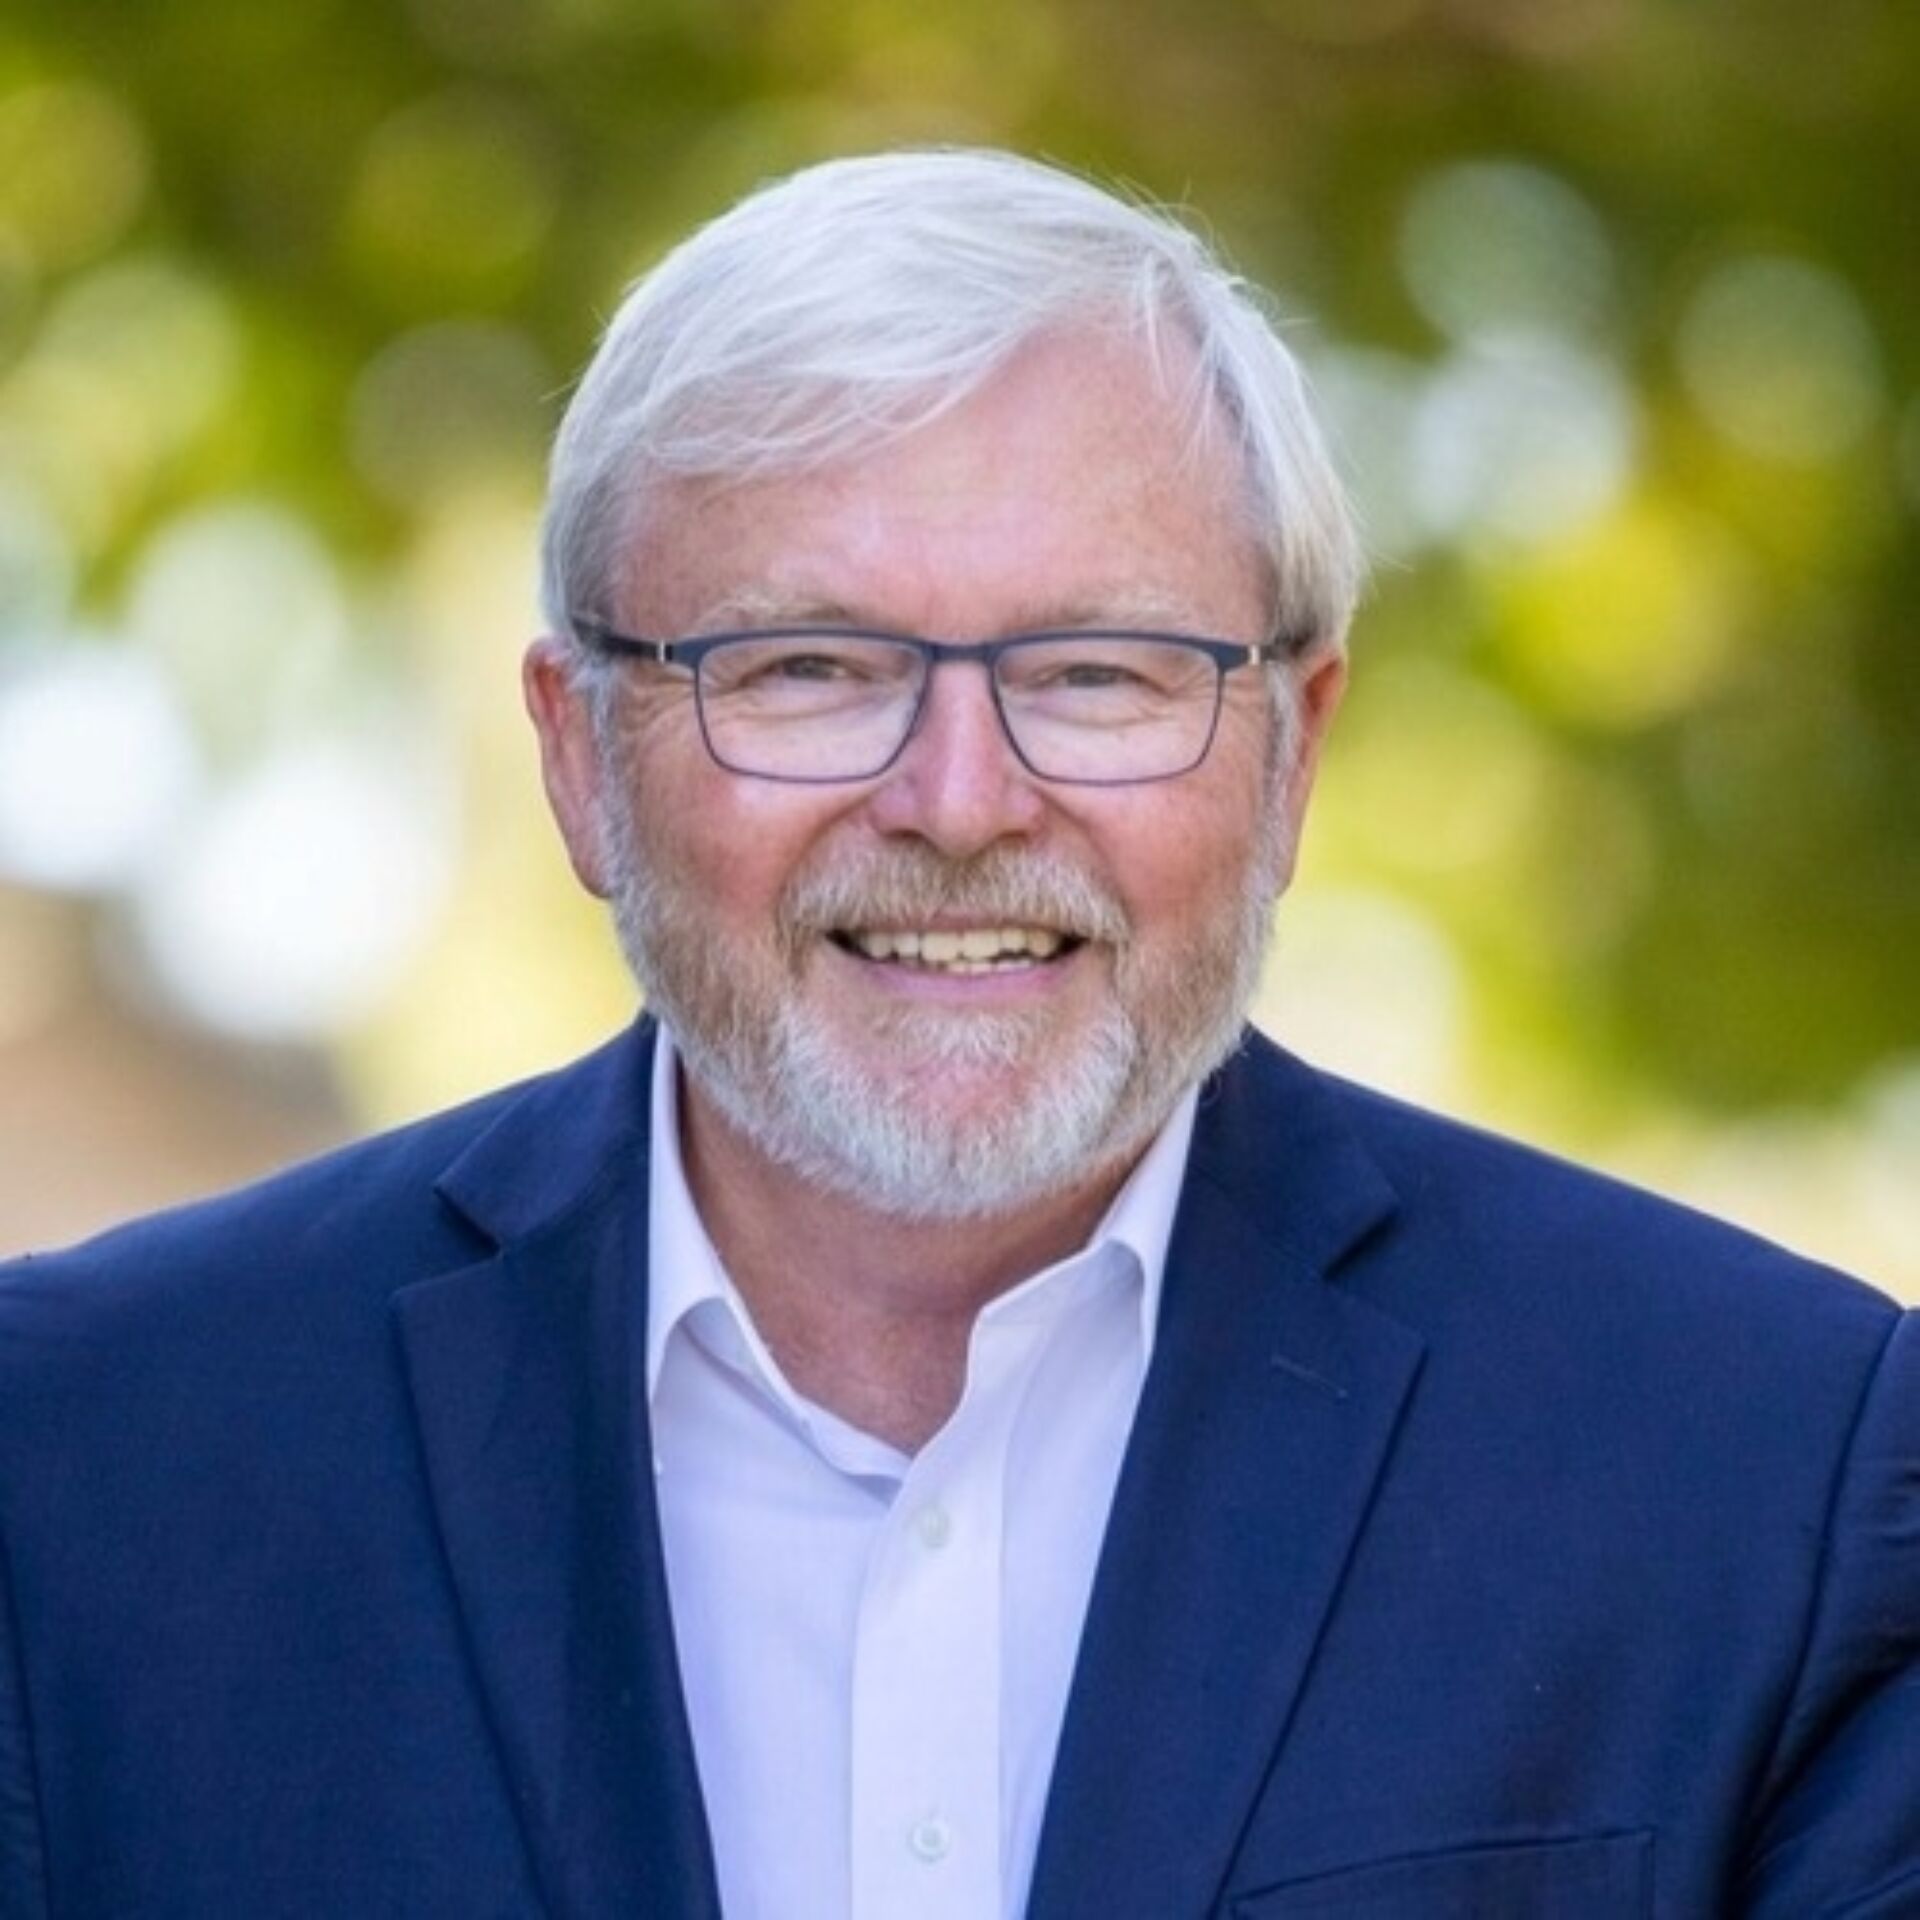 Kevin rudd updated 1